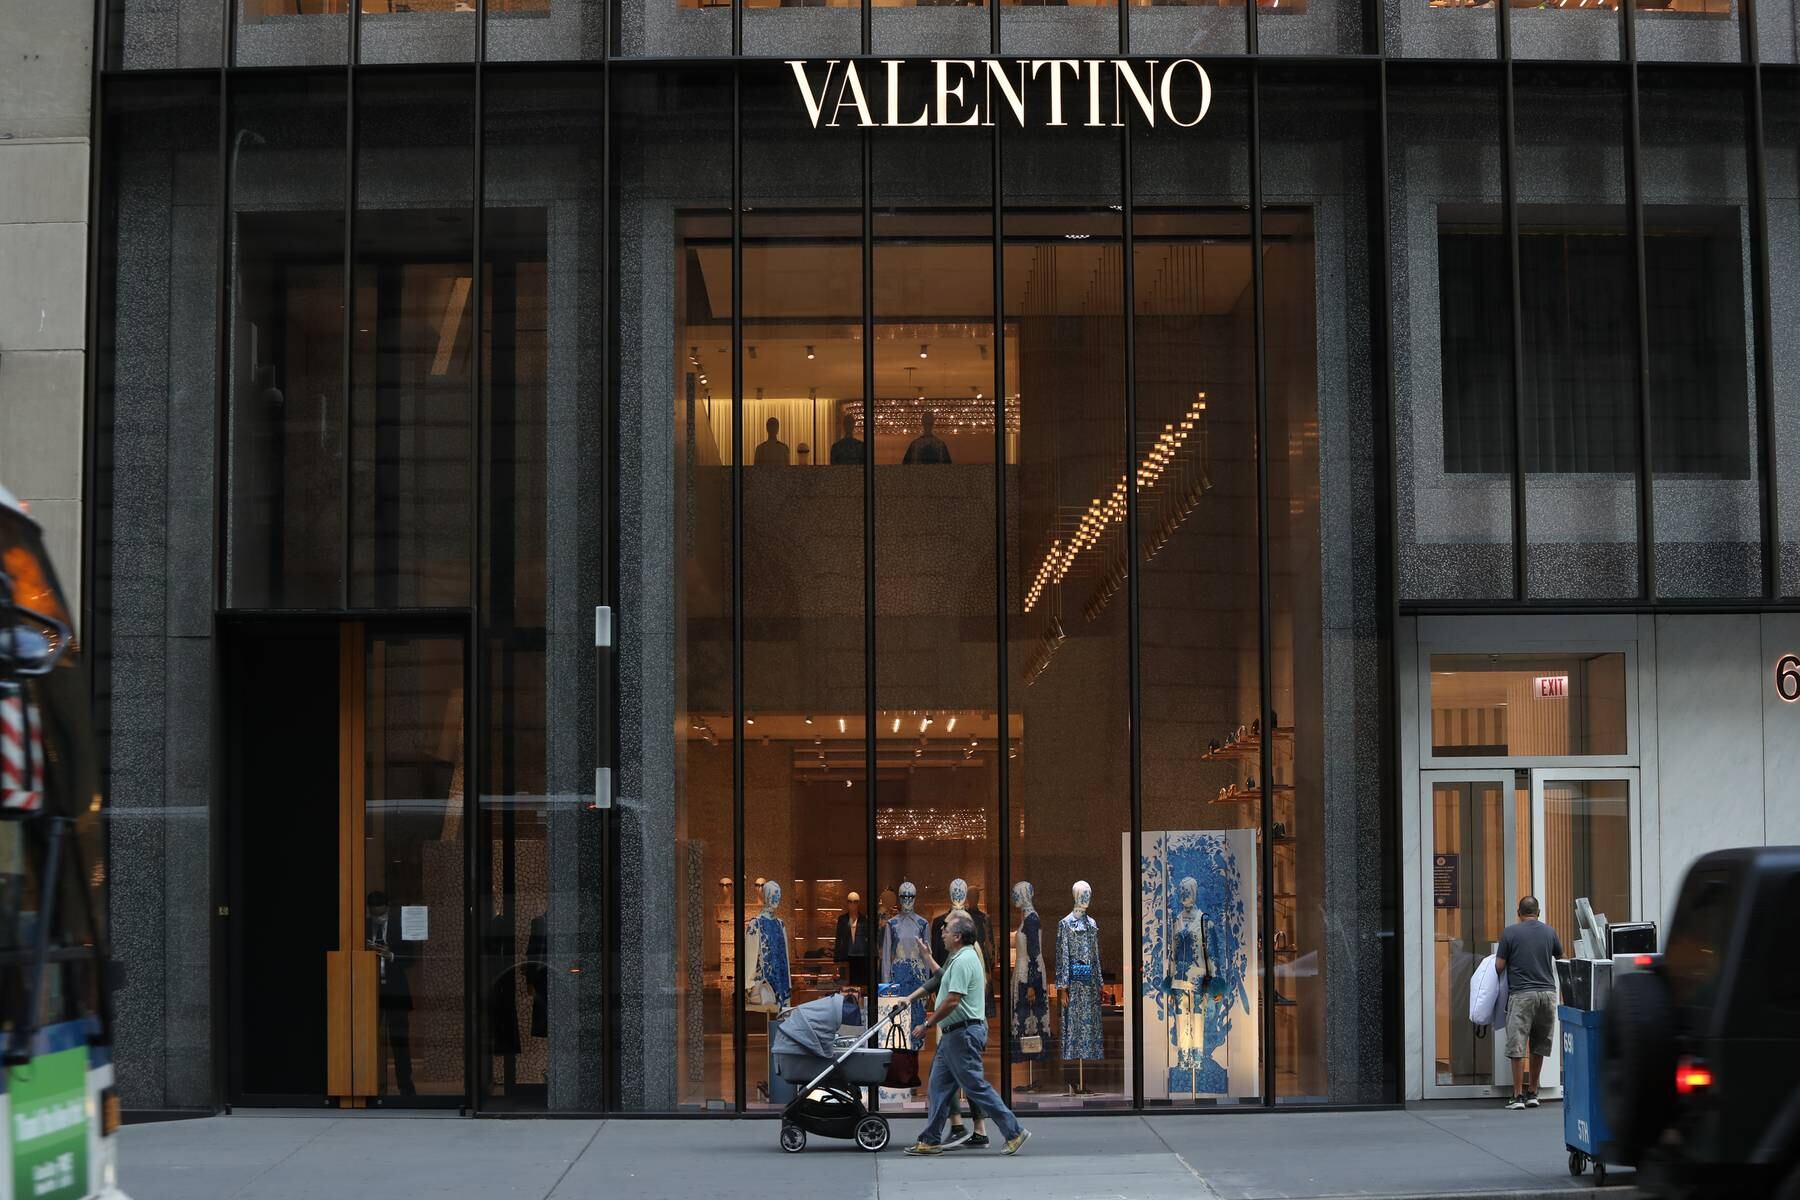 The Valentino store on Fifth Avenue in New York City.